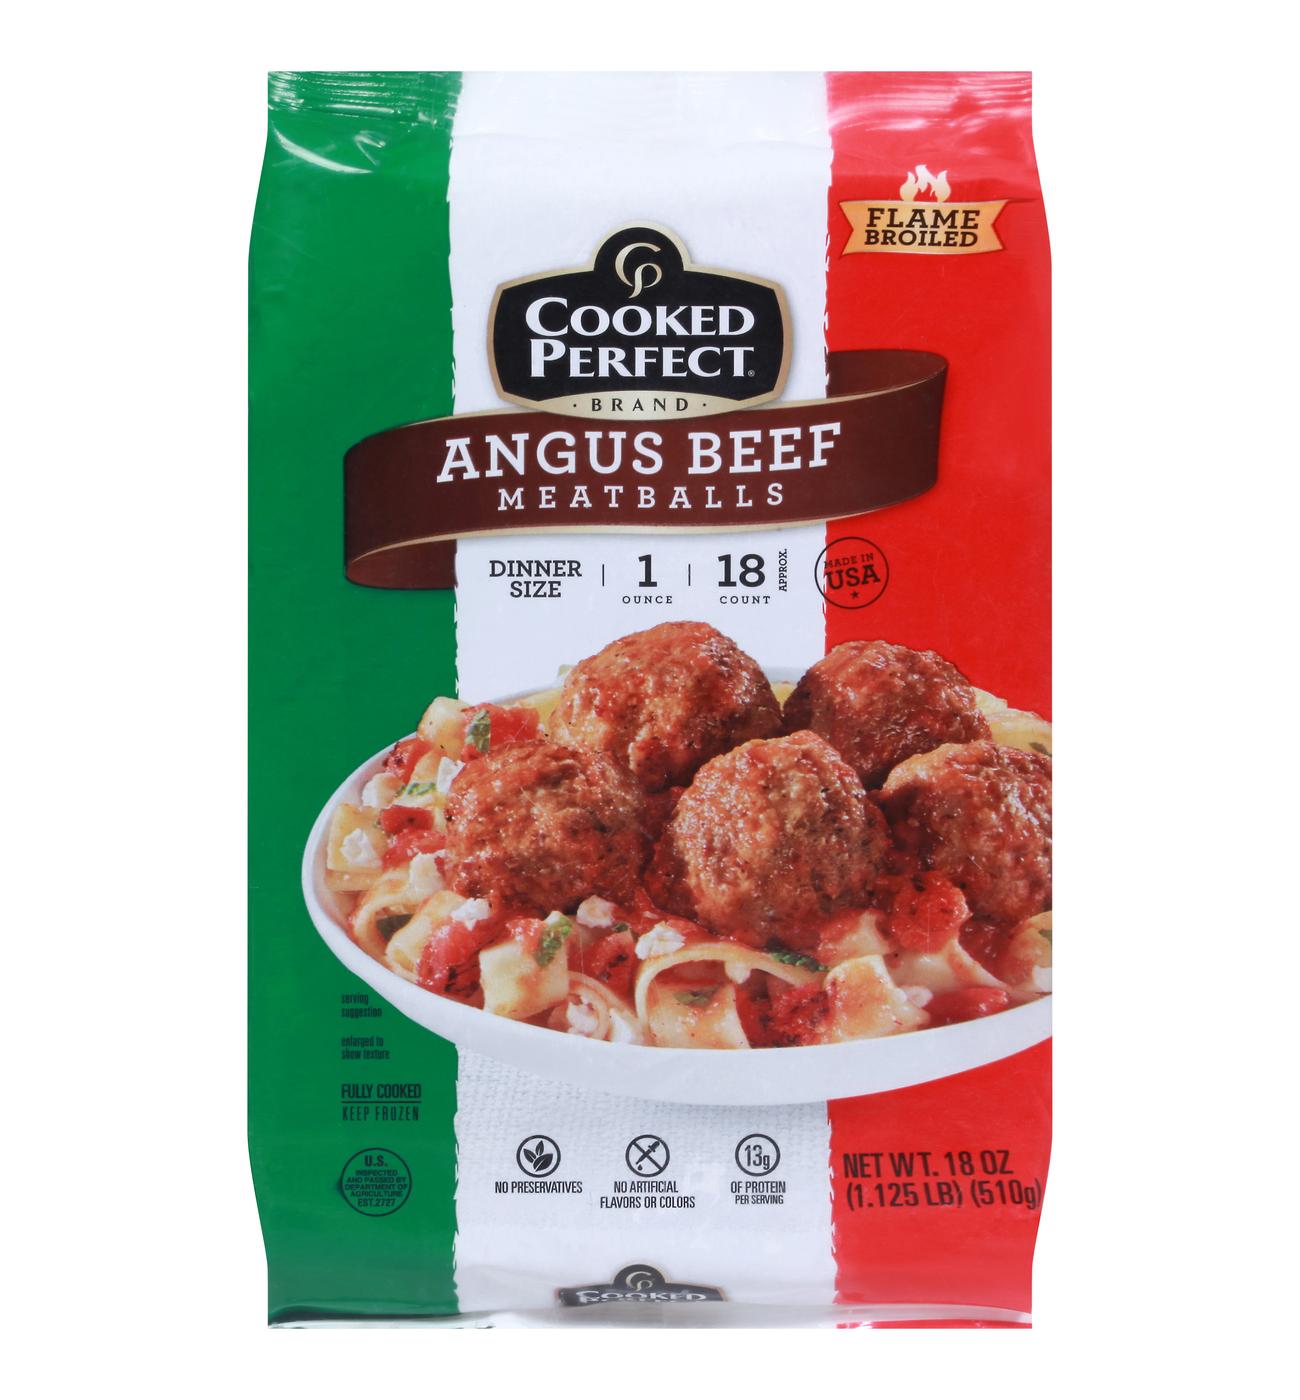 COOKED PERFECT Fully Cooked Frozen Angus Beef Meatballs; image 1 of 2